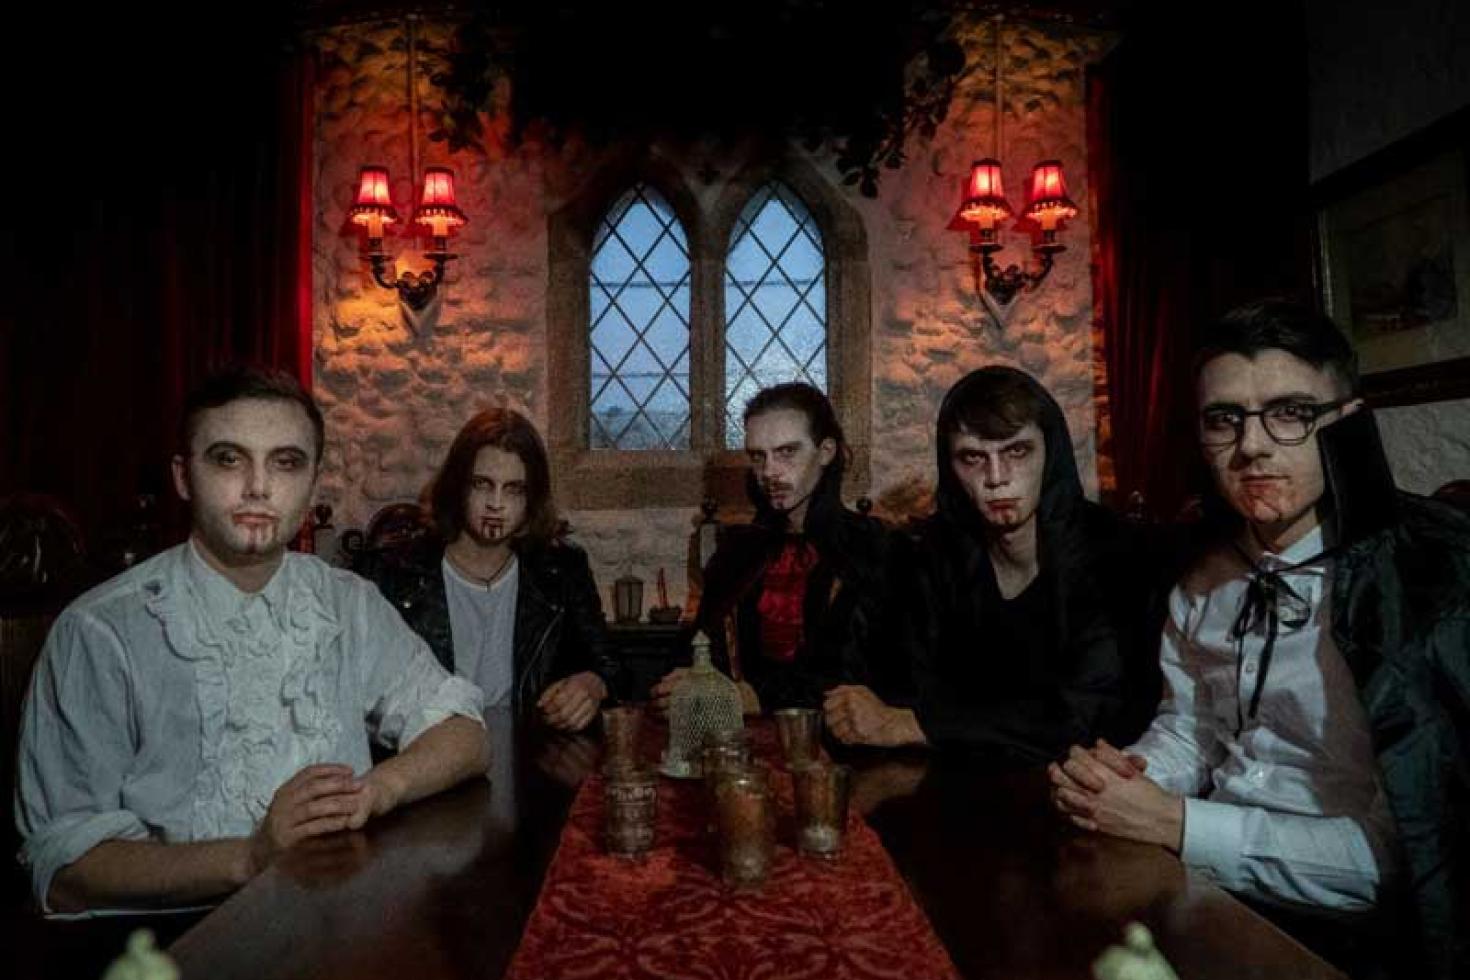 Real Authority release new track 'Transylvanian Rock' for Halloween